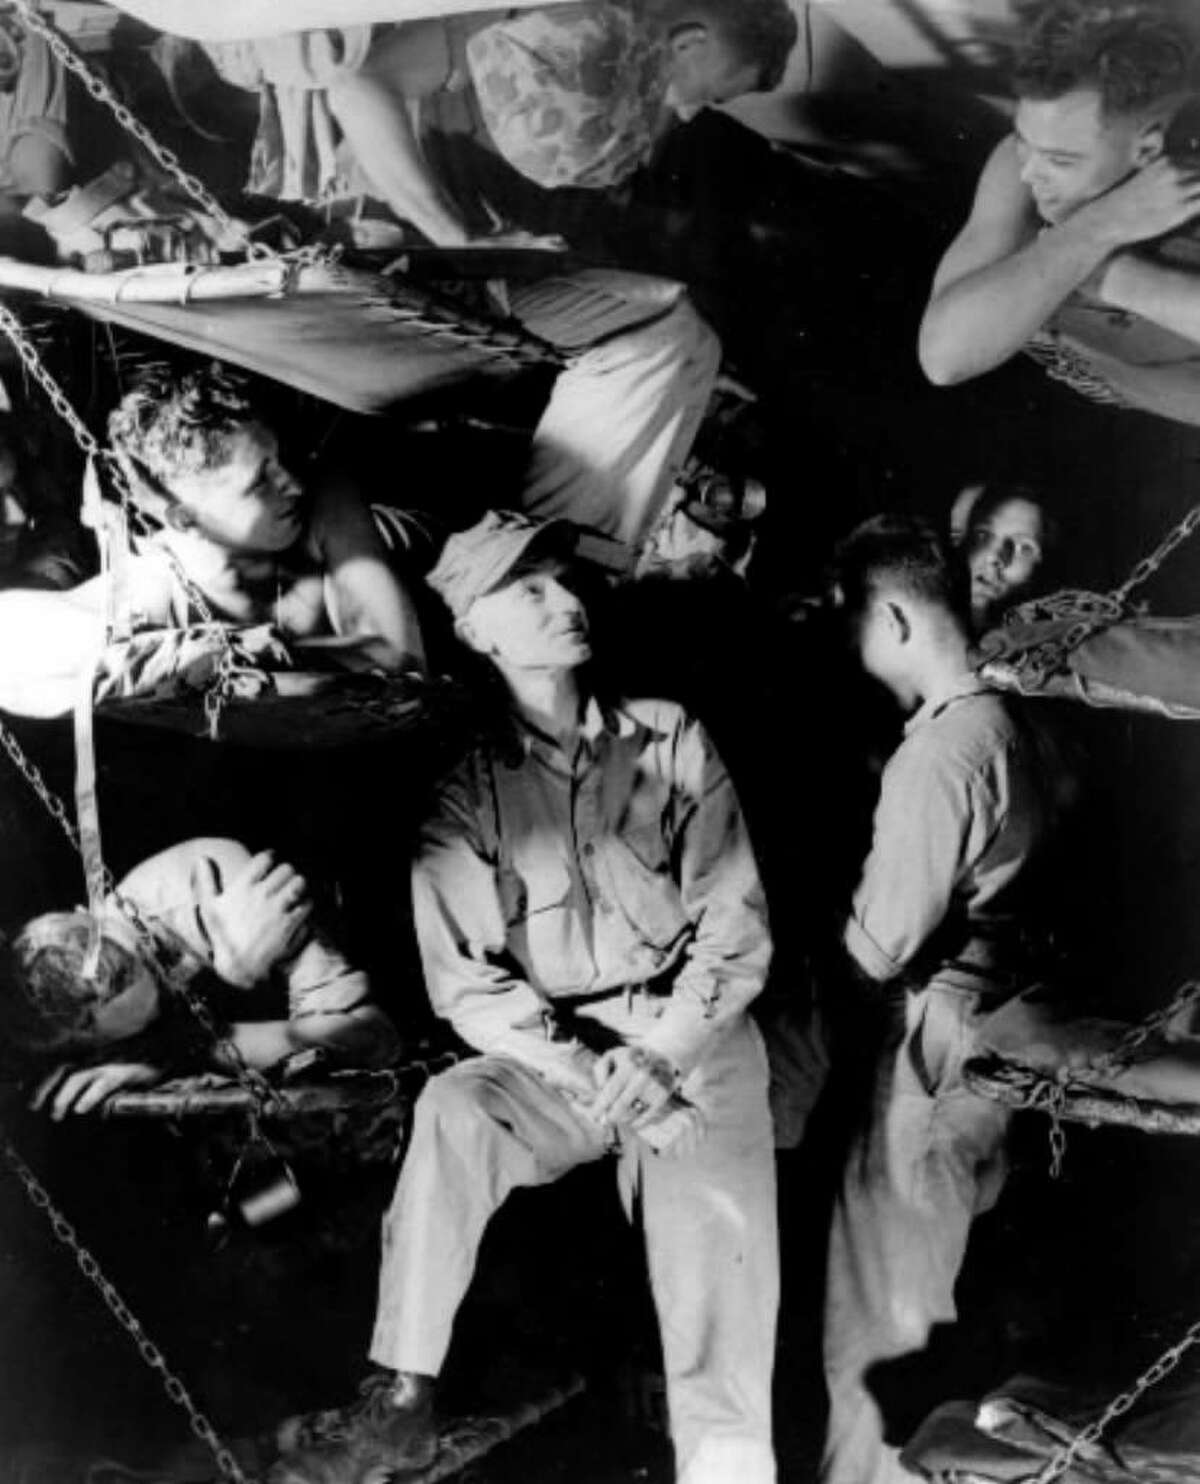 American war correspondent Ernie Pyle, center, talks with Marines below decks on a U.S. Navy transport while en route to the invasion of Okinawa during World War II, in this March 1945 file photo. Pyle was killed on April 18, 1945, by Japanese machine-gun fire on the island of Ie Shima in the southwestern Pacific Ocean near Okinawa. (Associated Press archive)